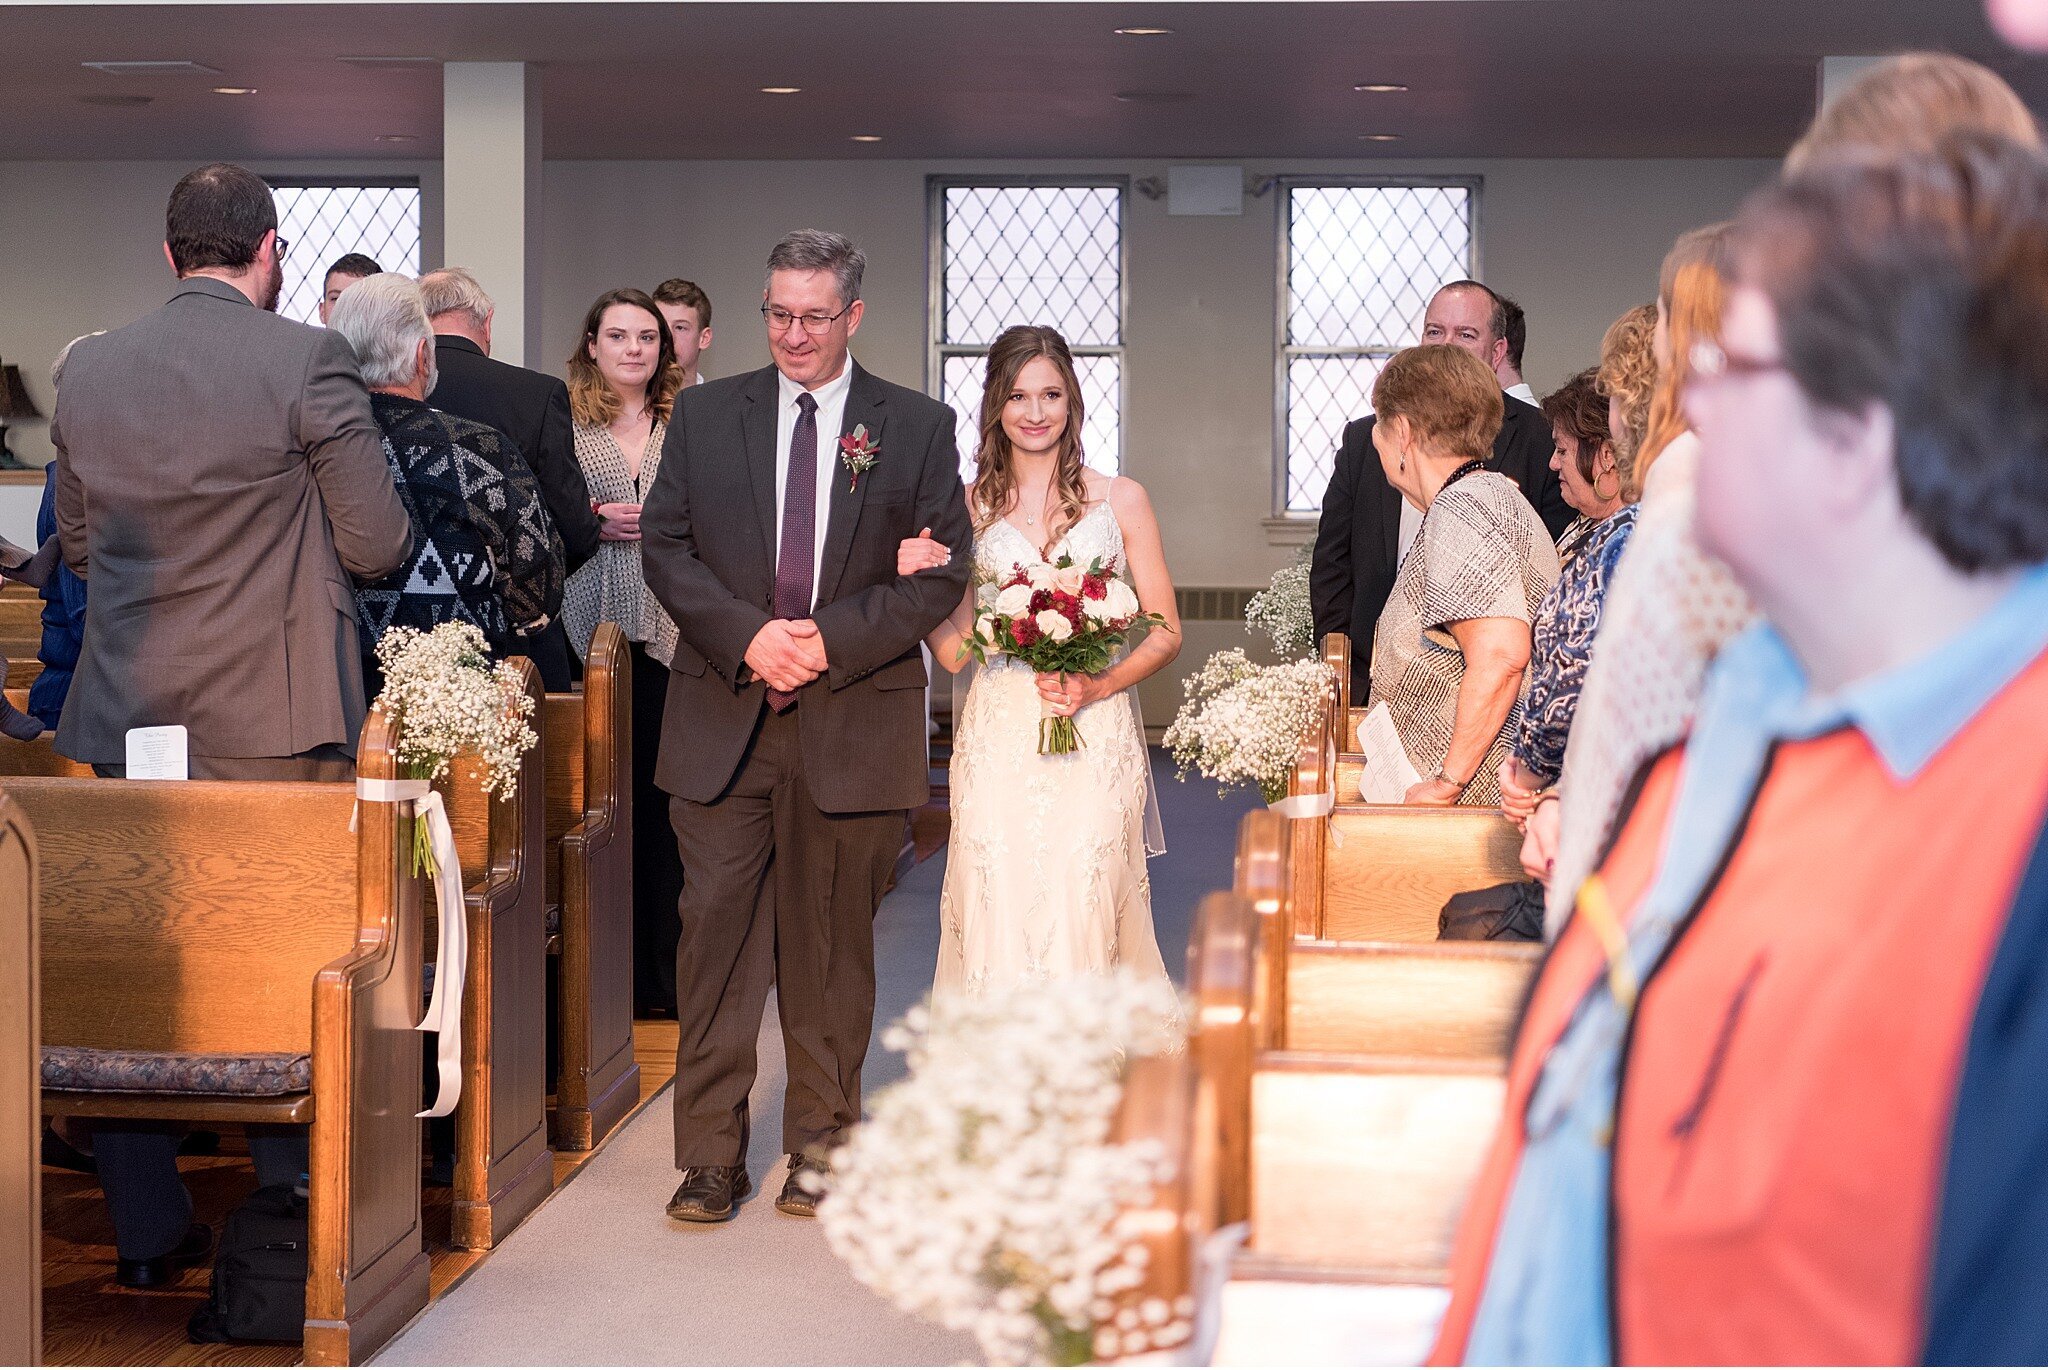 Purcell Friendship Hall Hershey PA Romantic fall wedding photography 